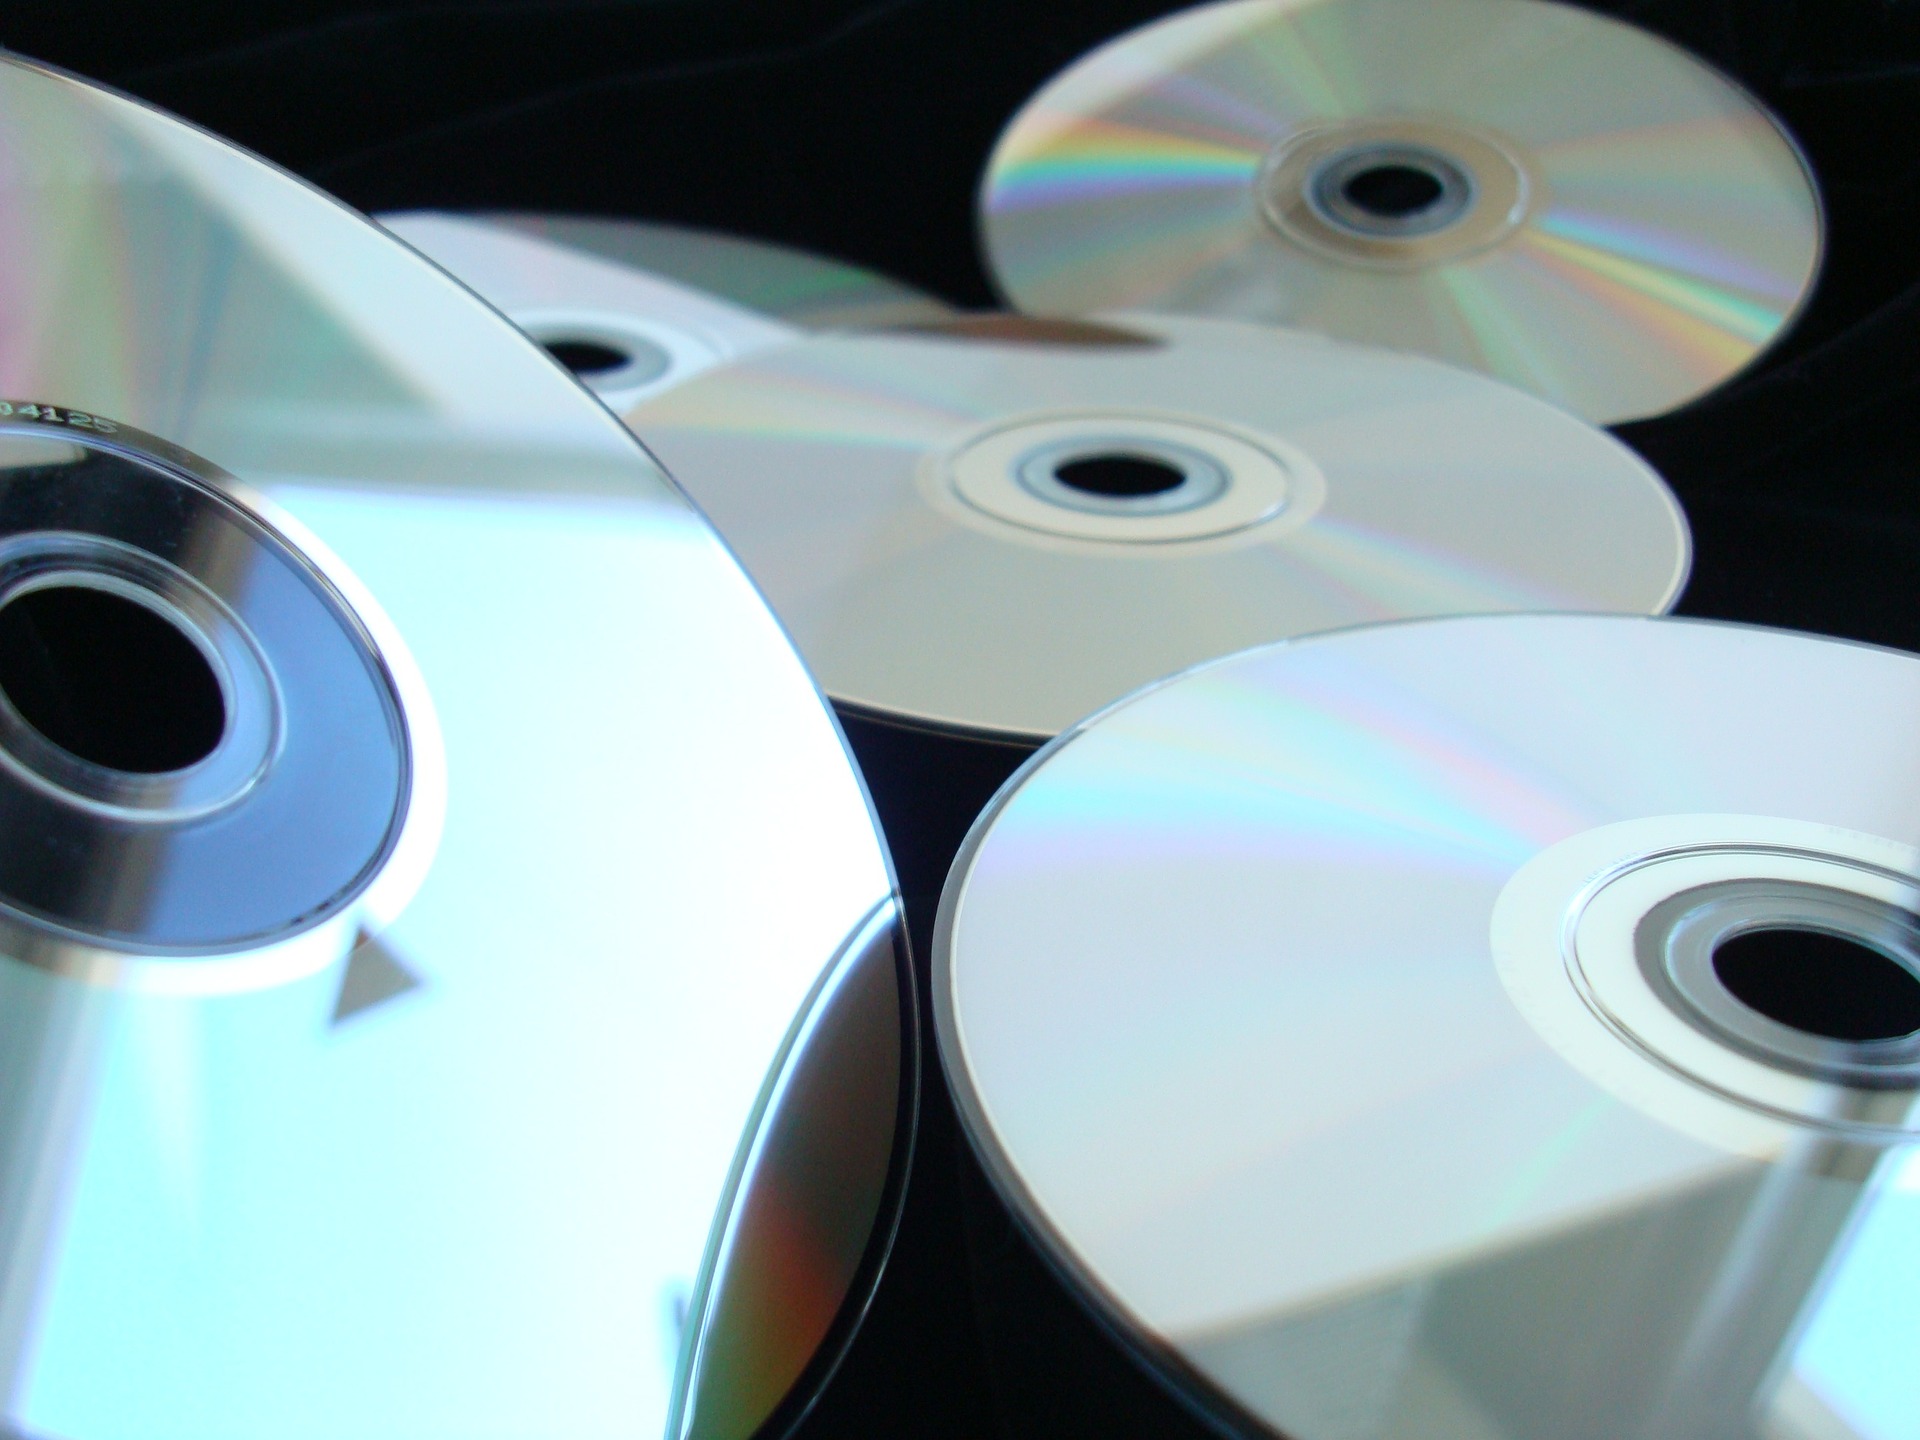 It's all about sputtering! A simple explanation of the structure of CDs and DVDs.
